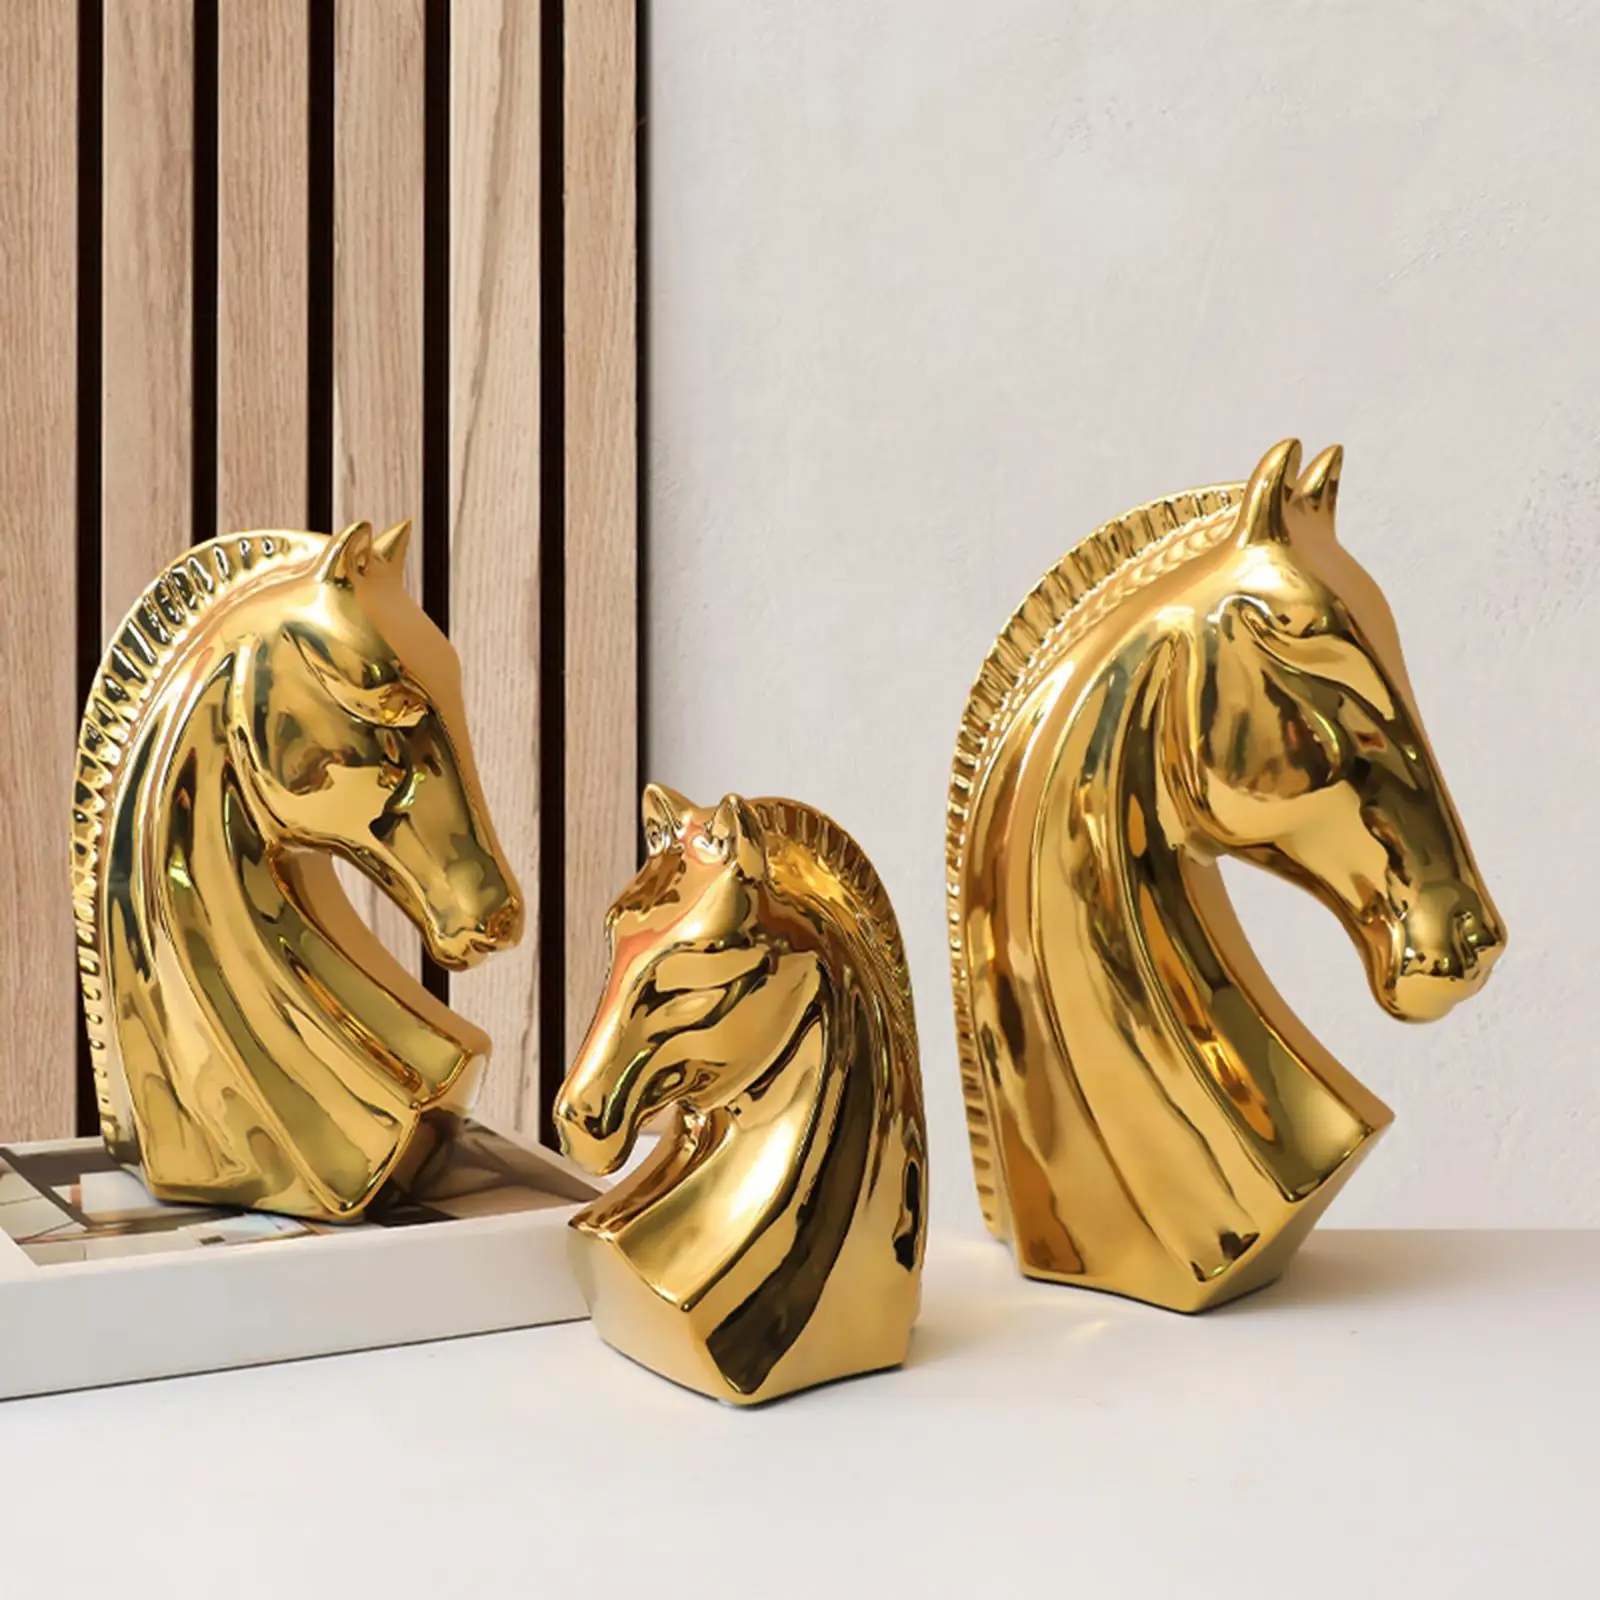 Ceramic Horse Statue Animal Statue Figurine Crafts for Home Office Bedroom Decoration Ornament